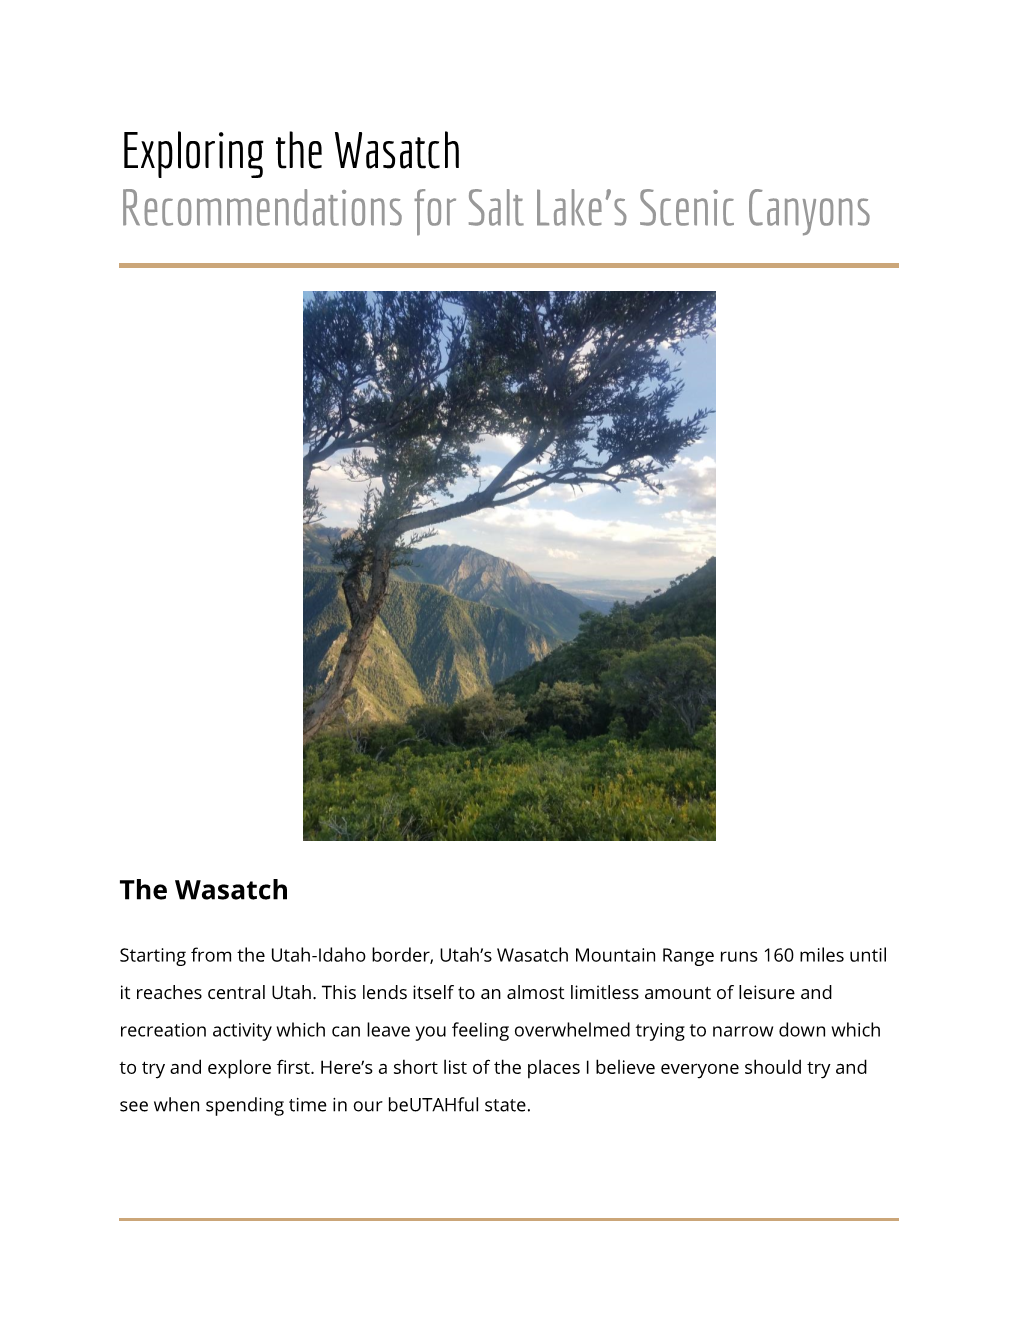 Exploring the Wasatch Recommendations for Salt Lake's